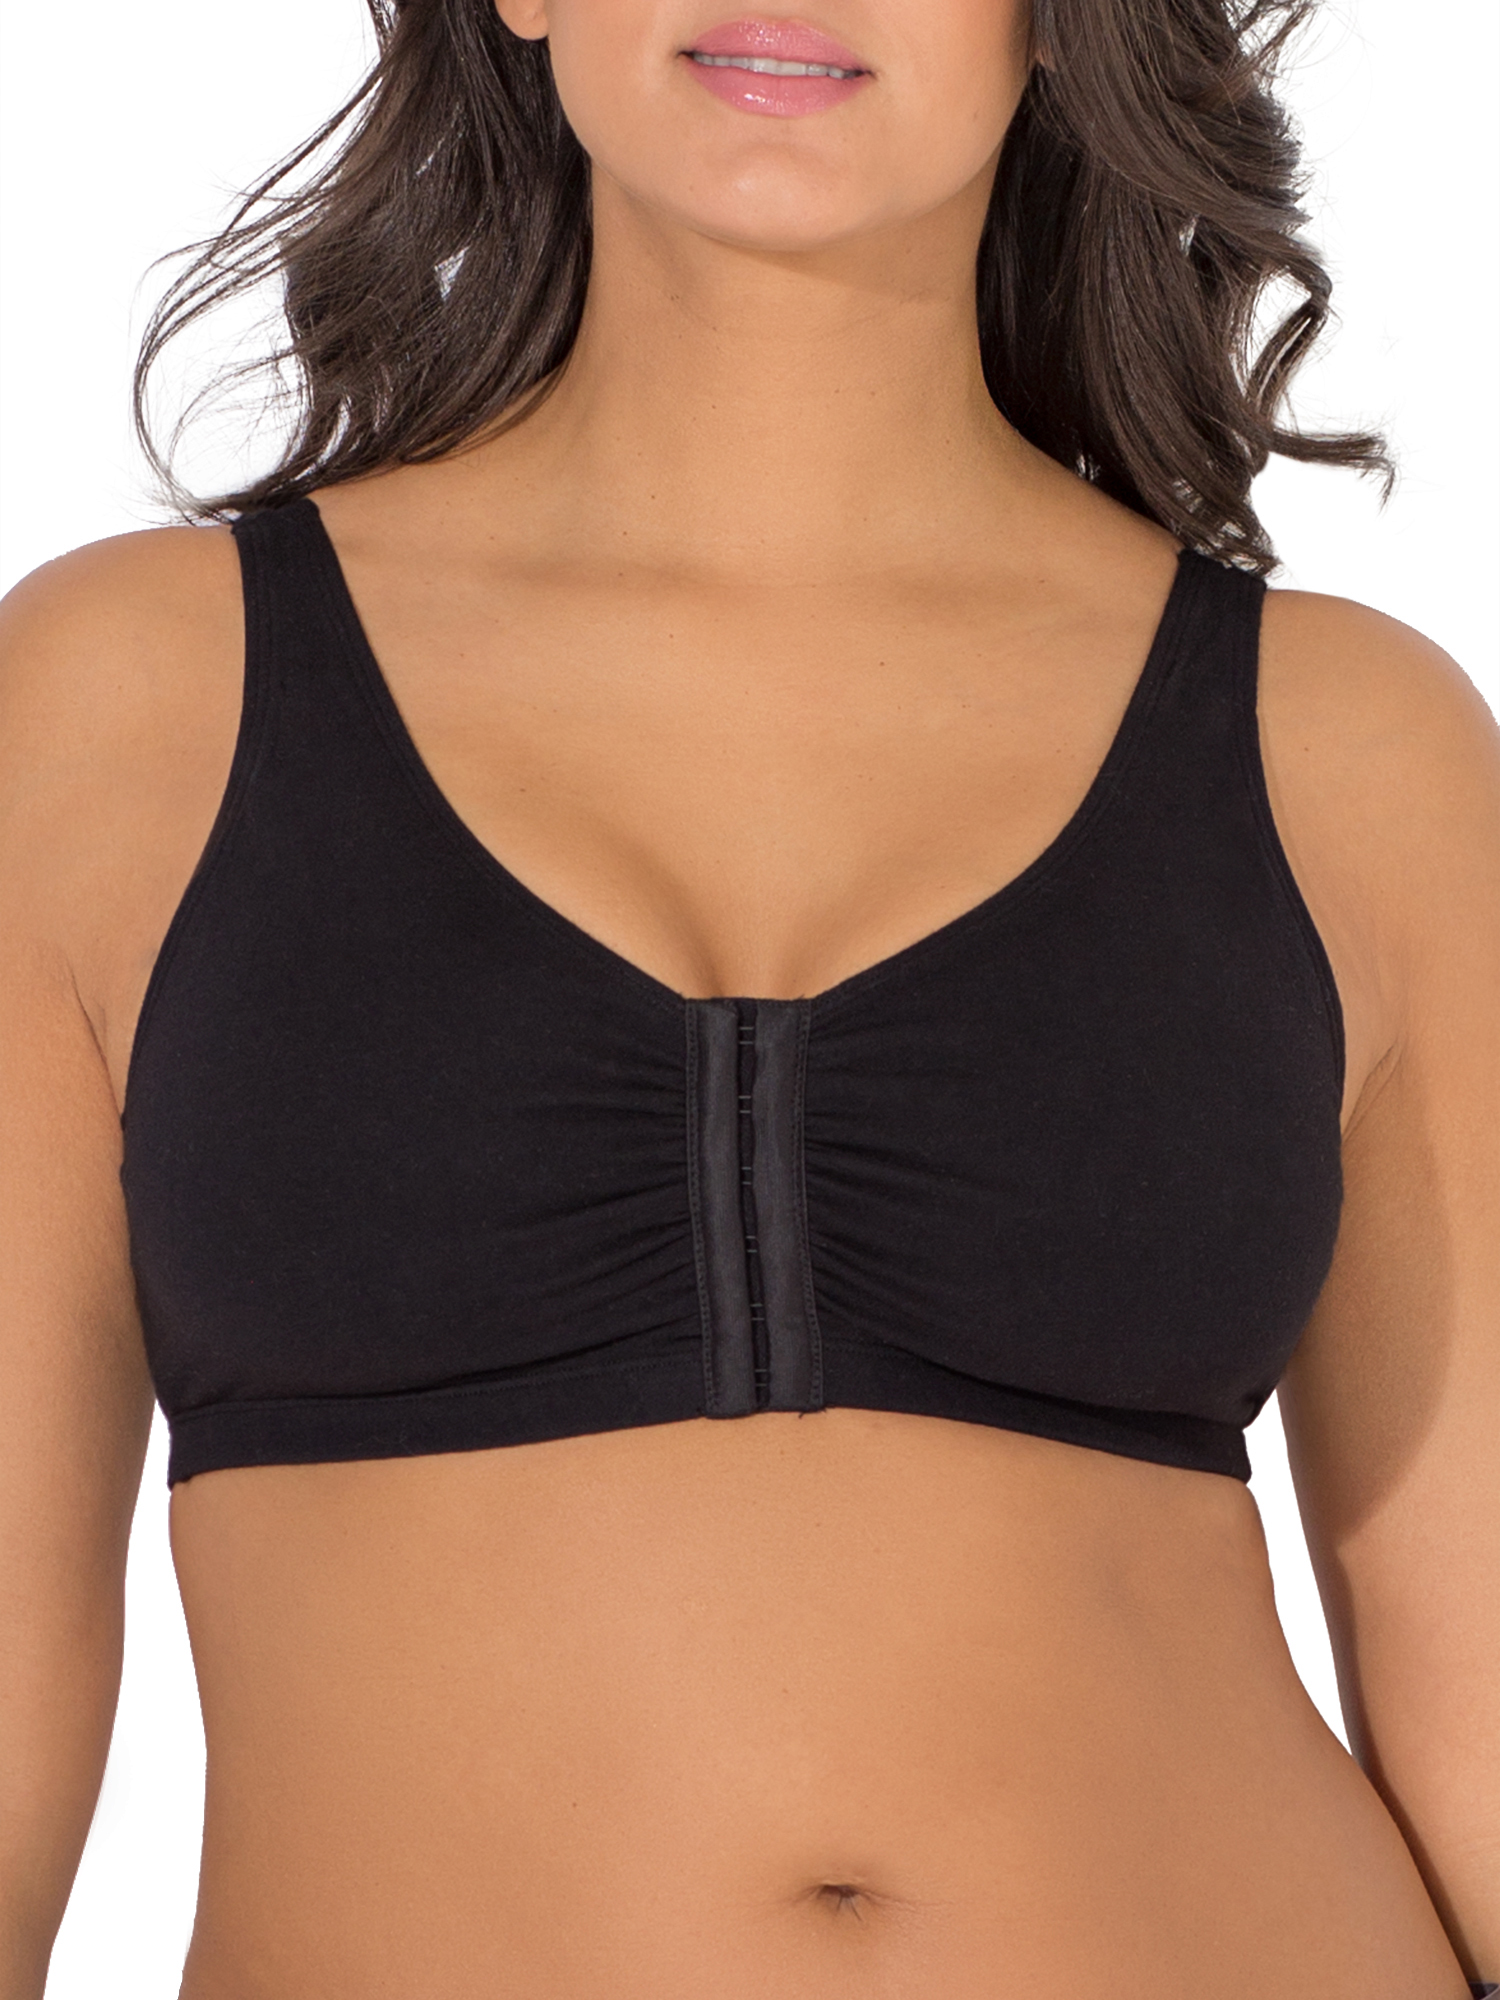 Fruit of The Loom Women's Comfort Front Close Cotton Sports Bra, 2 Pack - image 5 of 7